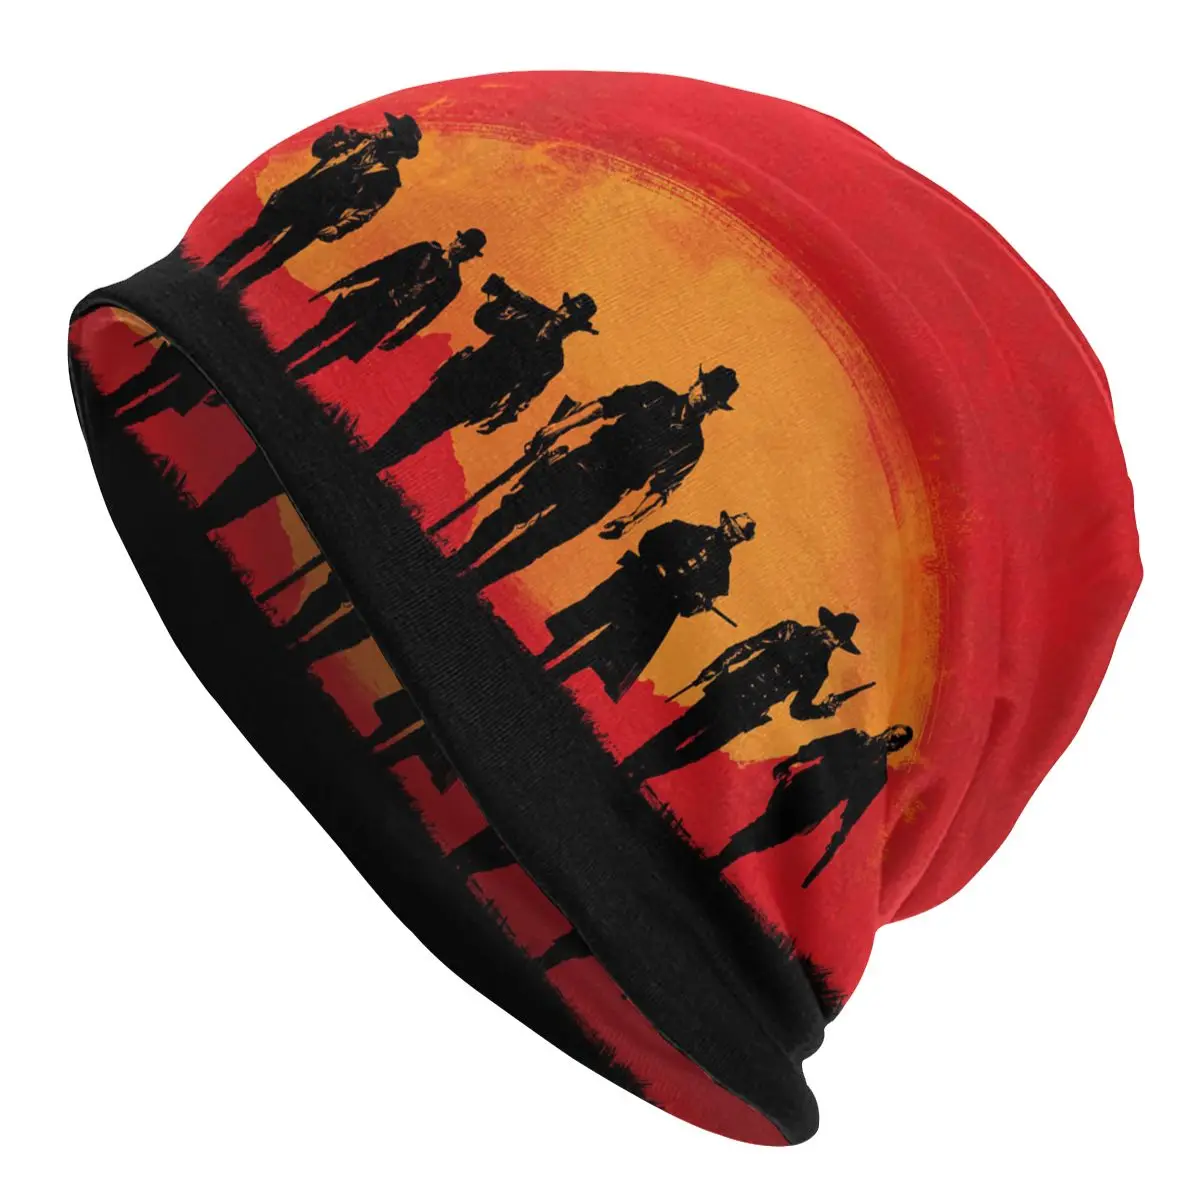 

Shadow Red Dead Redemption John Marston Game Unisex Bonnet Winter Warm Cycling Hats Double Layer Thin Hat Breathable Caps